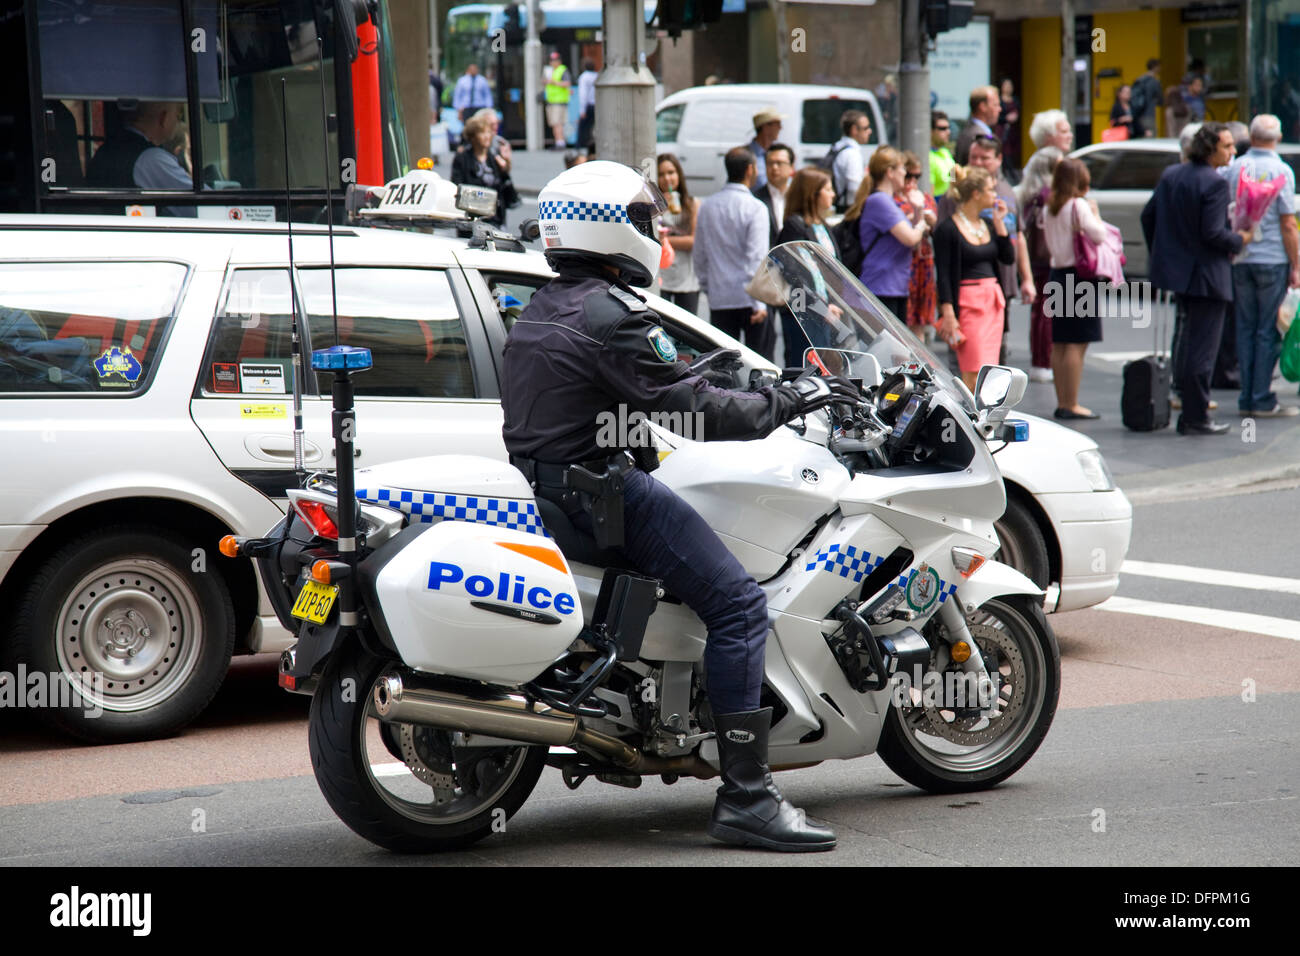 New south wales police officer in Sydney, the motorcyclists are tasked with improving traffic flow in the city centre, NSW,Australia Stock Photo